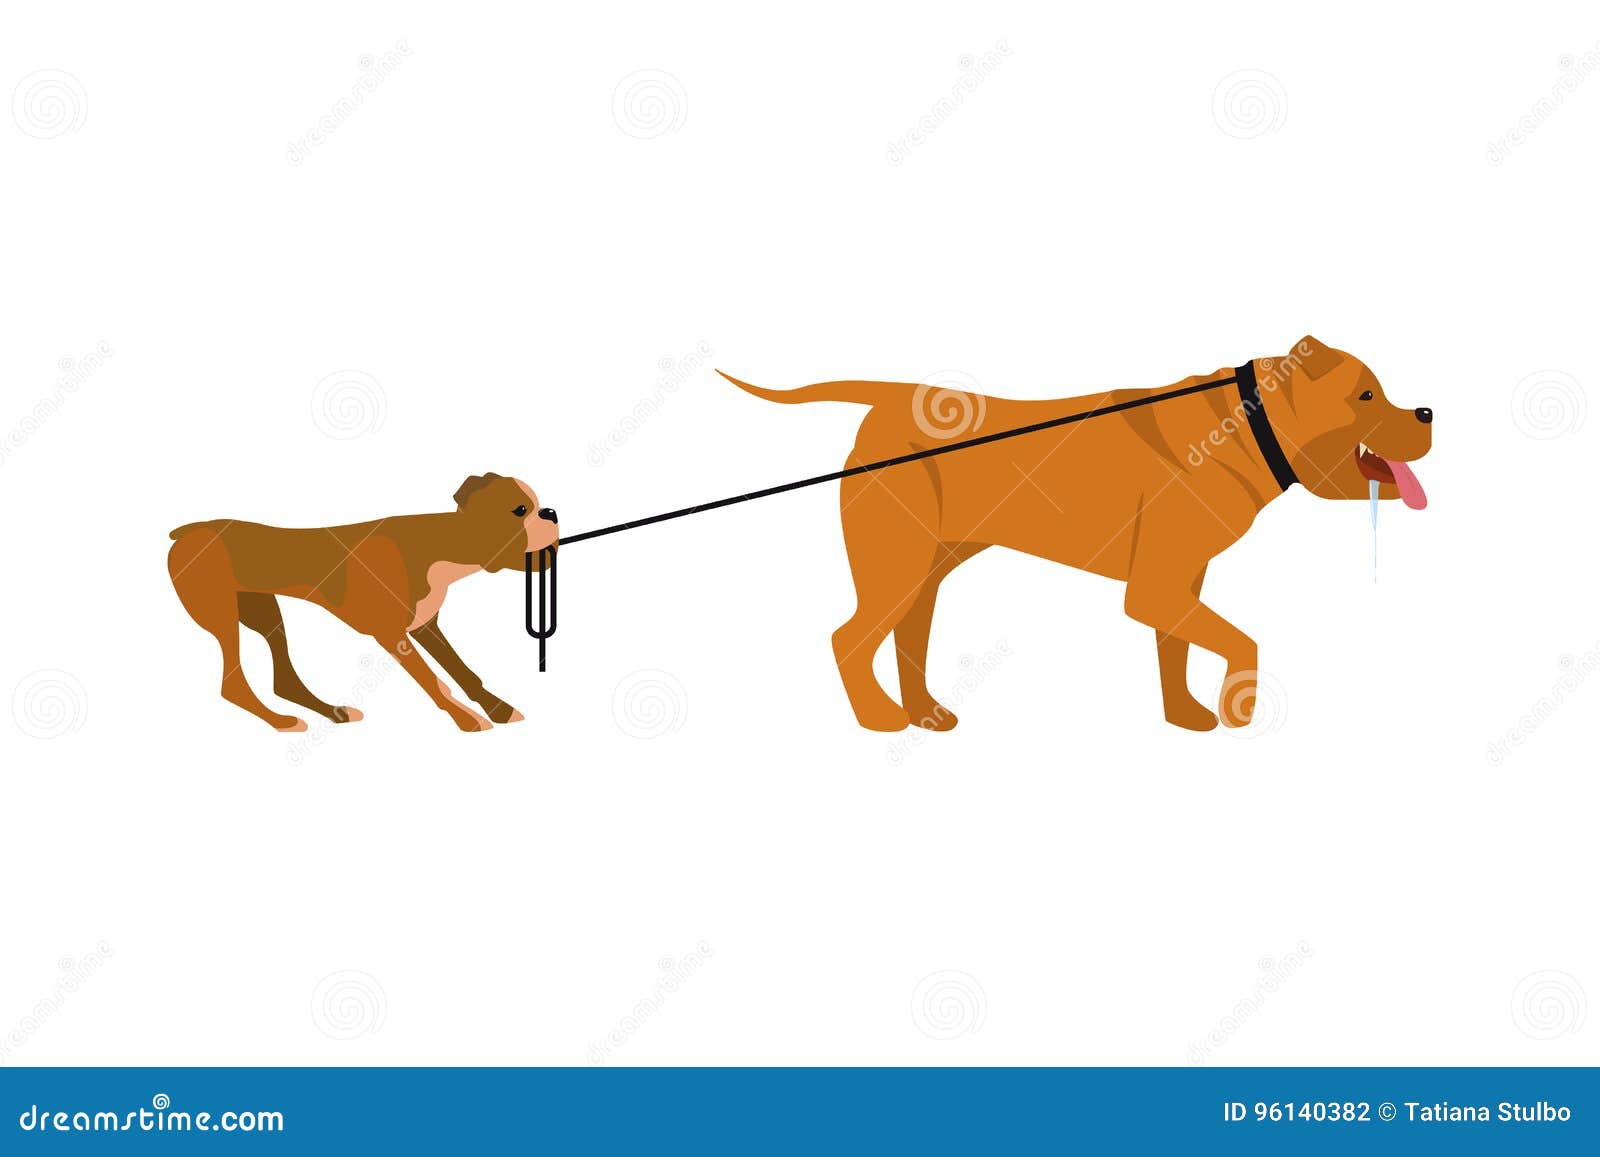 Small and big dogs stock vector. Illustration of design - 96140382